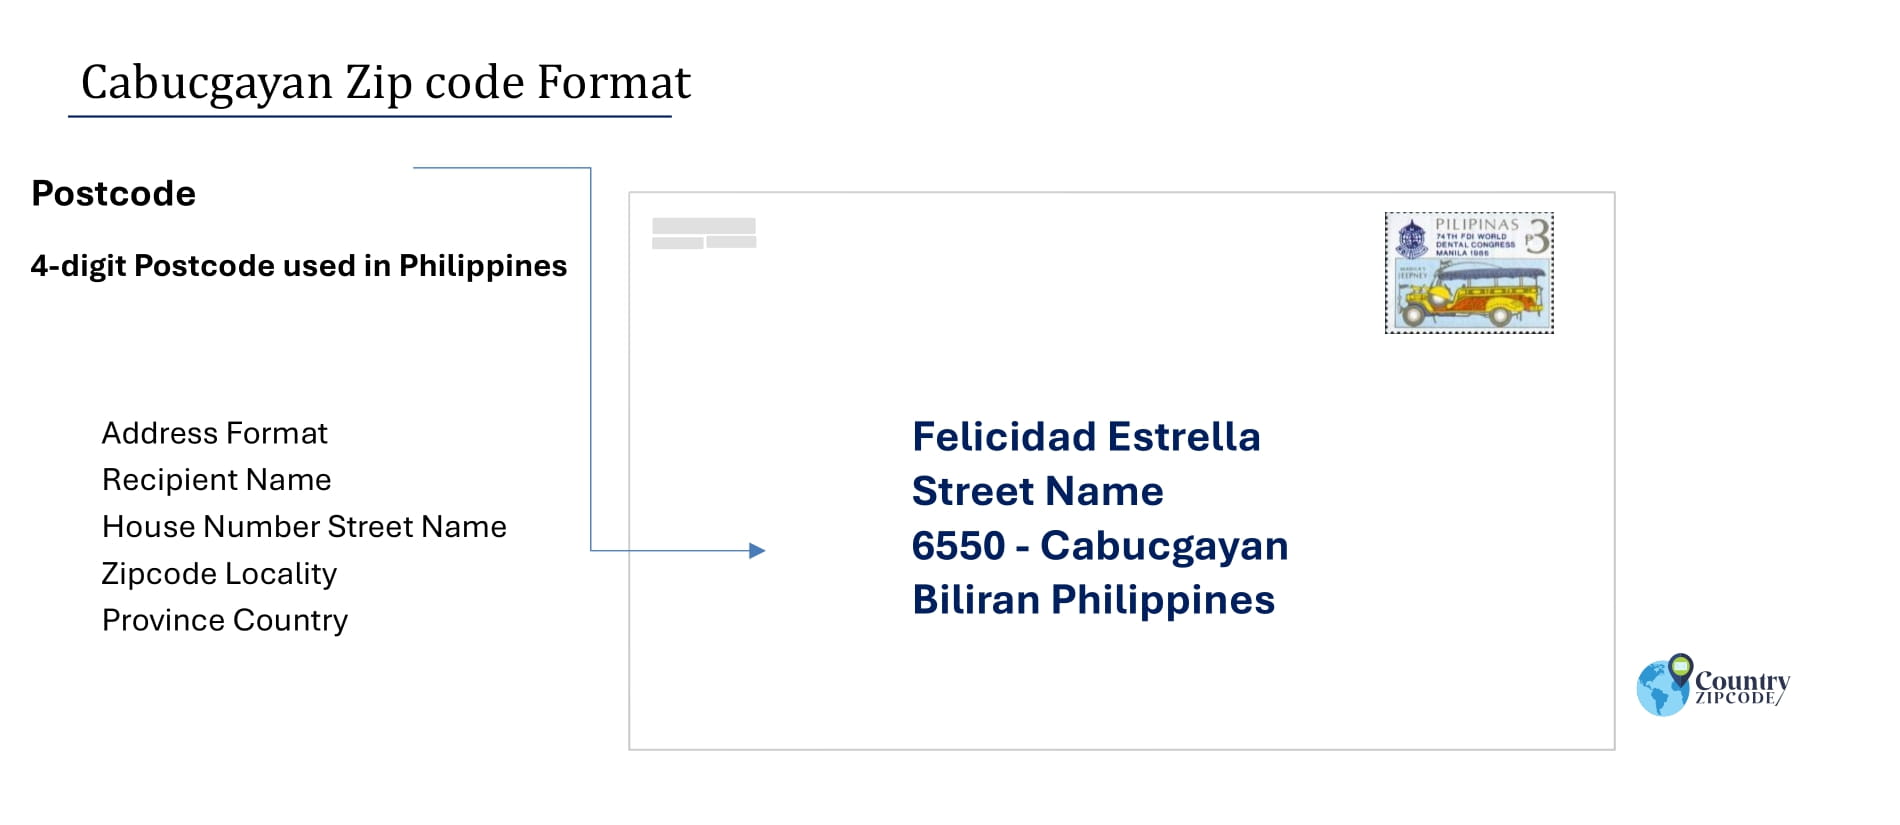 example of Cabucgayan Philippines zip code and address format